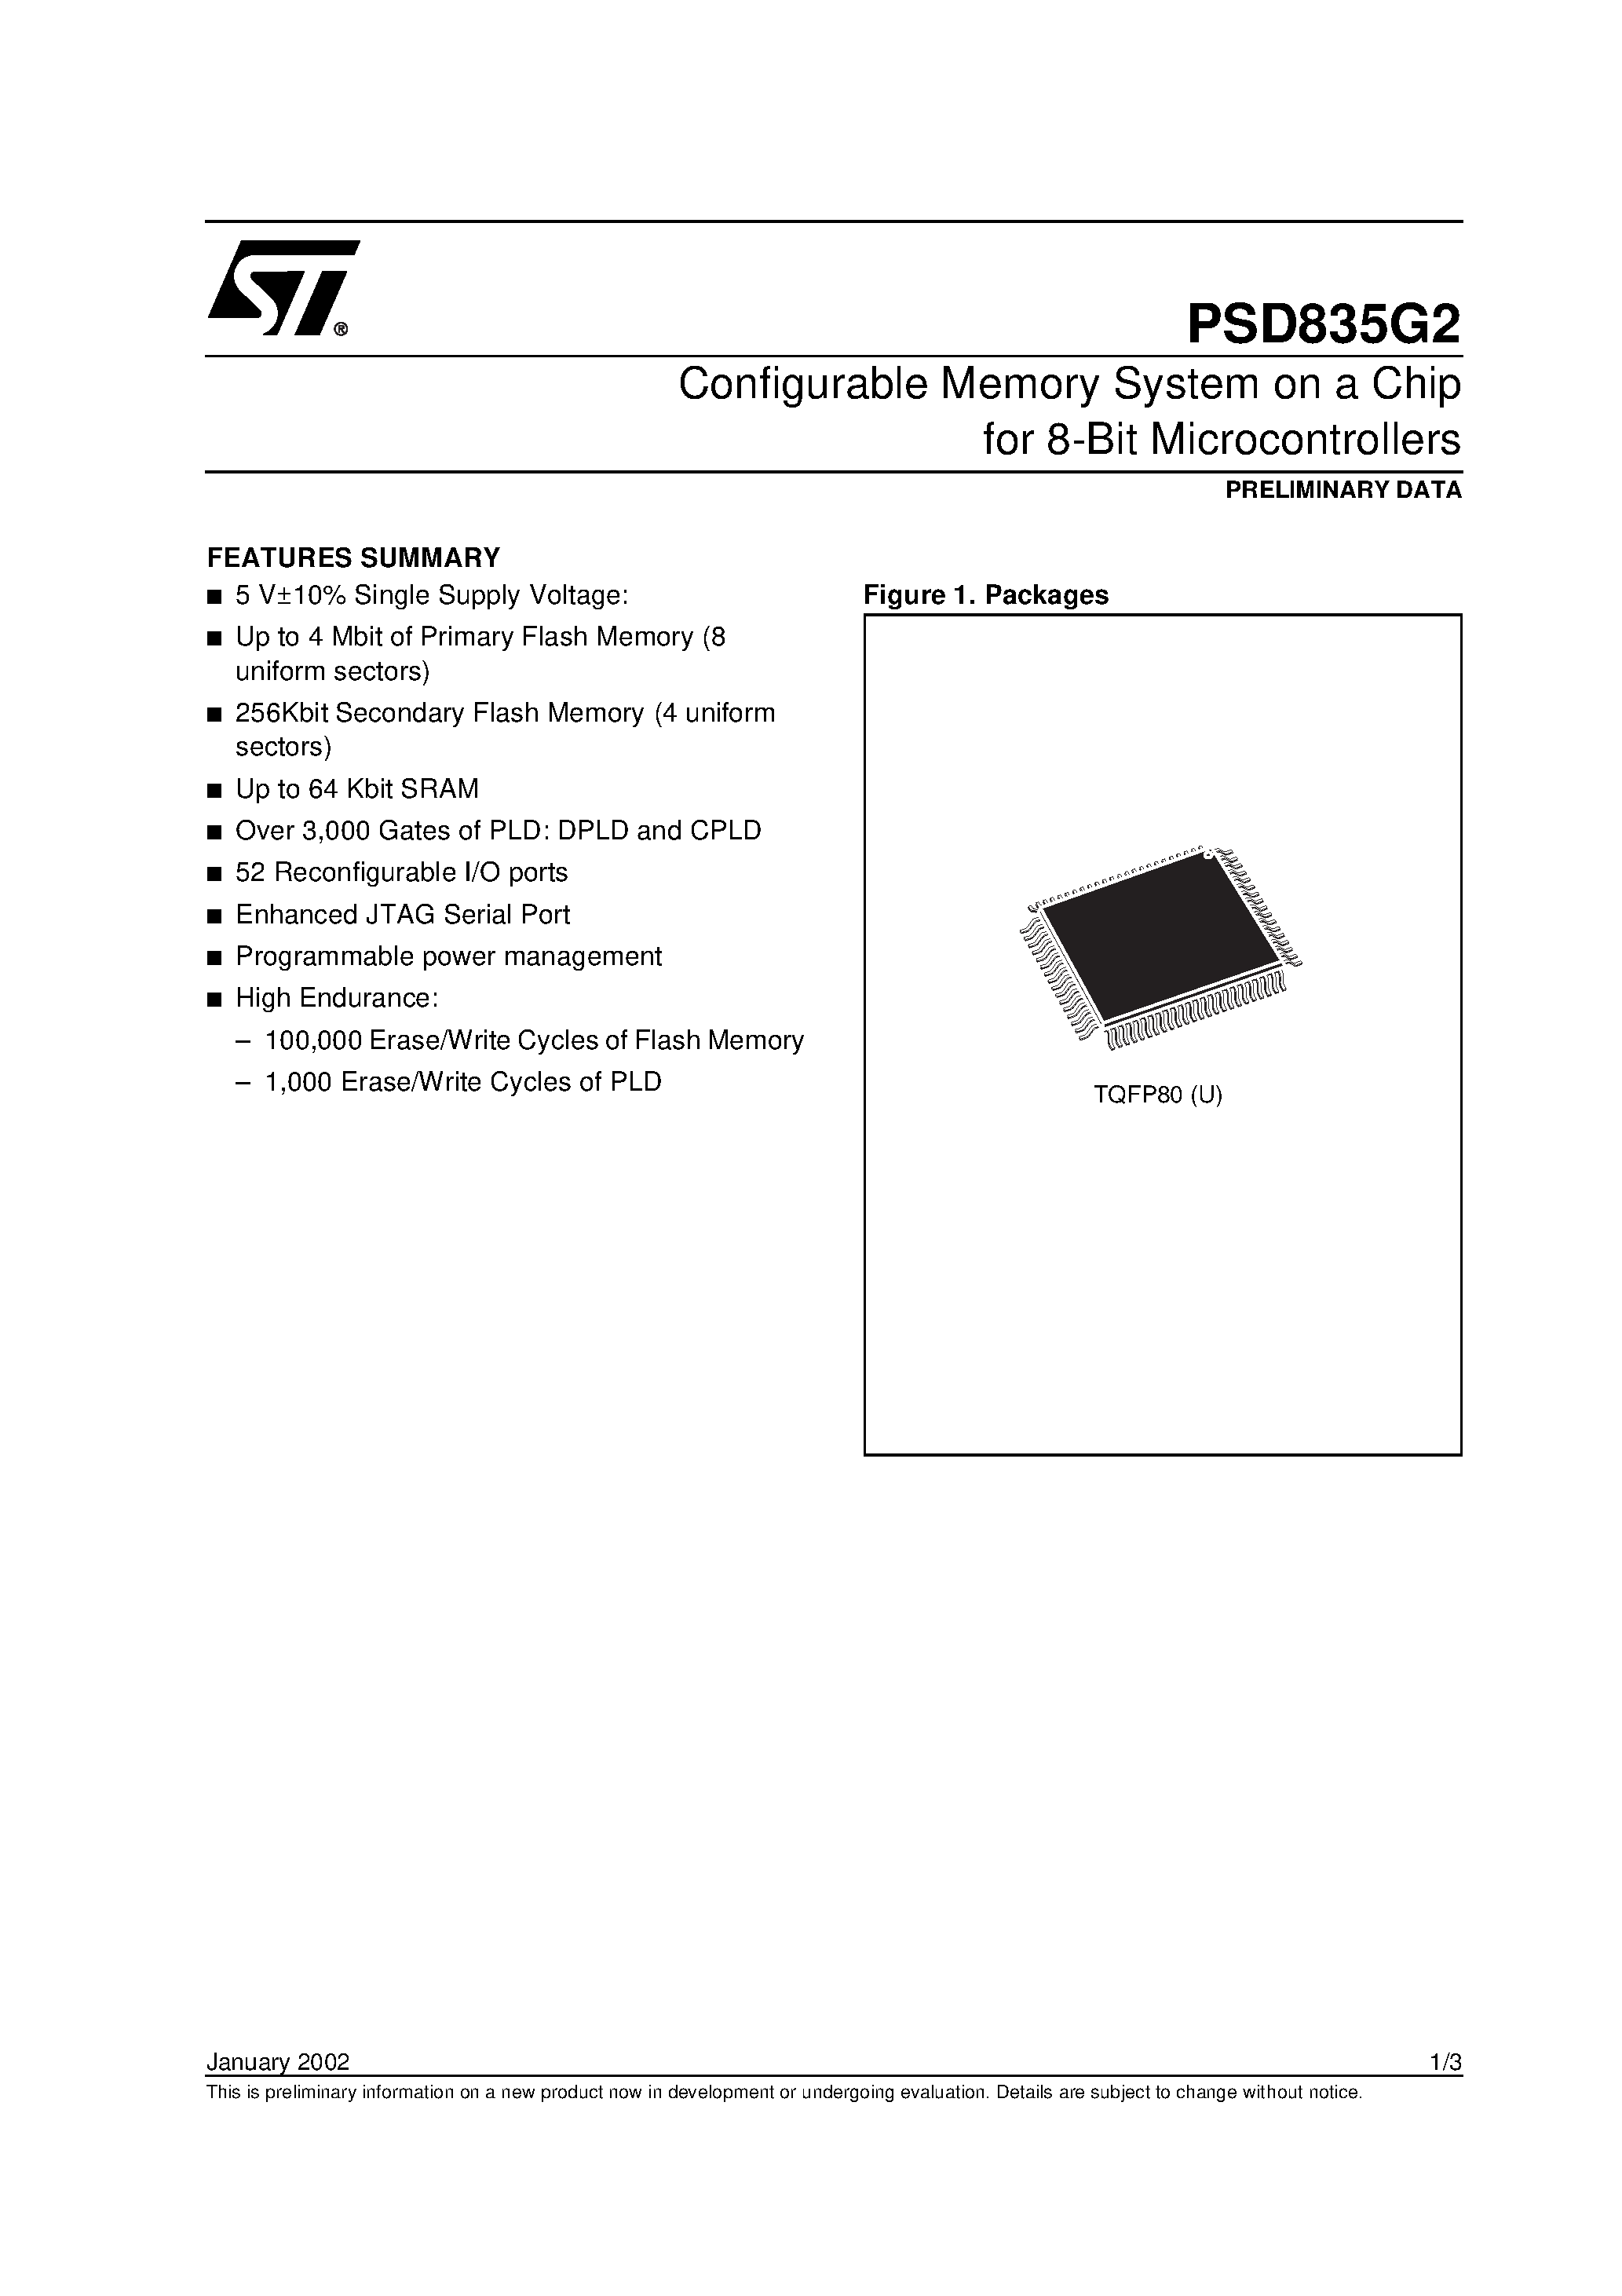 Datasheet PSD835F1-A-70JI - Configurable Memory System on a Chip for 8-Bit Microcontrollers page 1